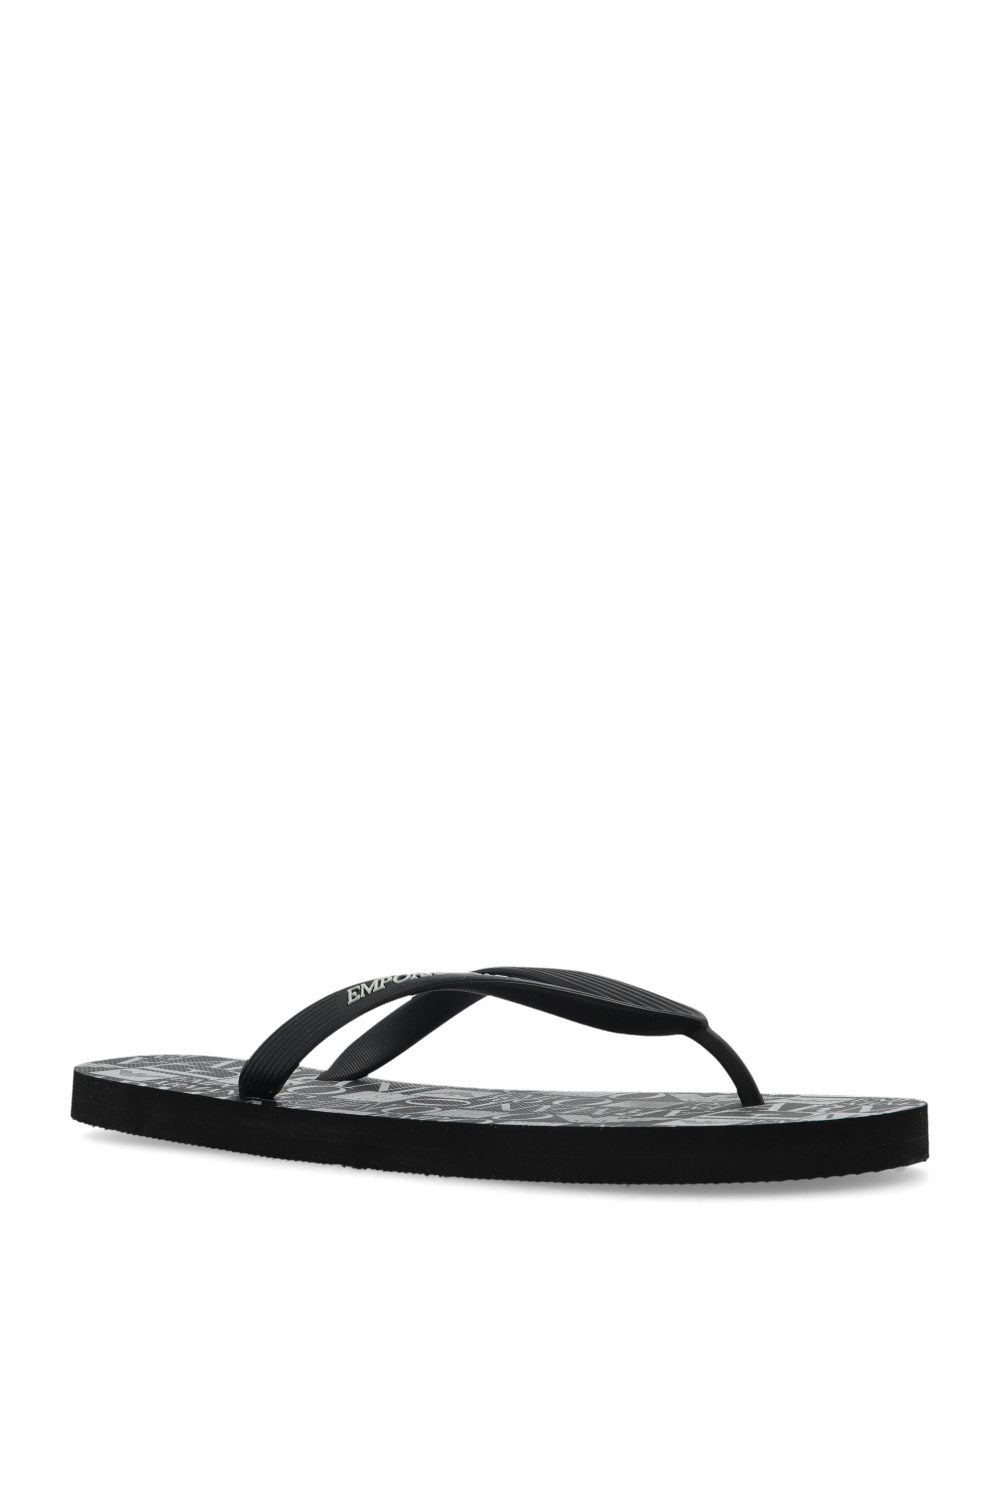 Emporio holdall armani Rubber slides with logo